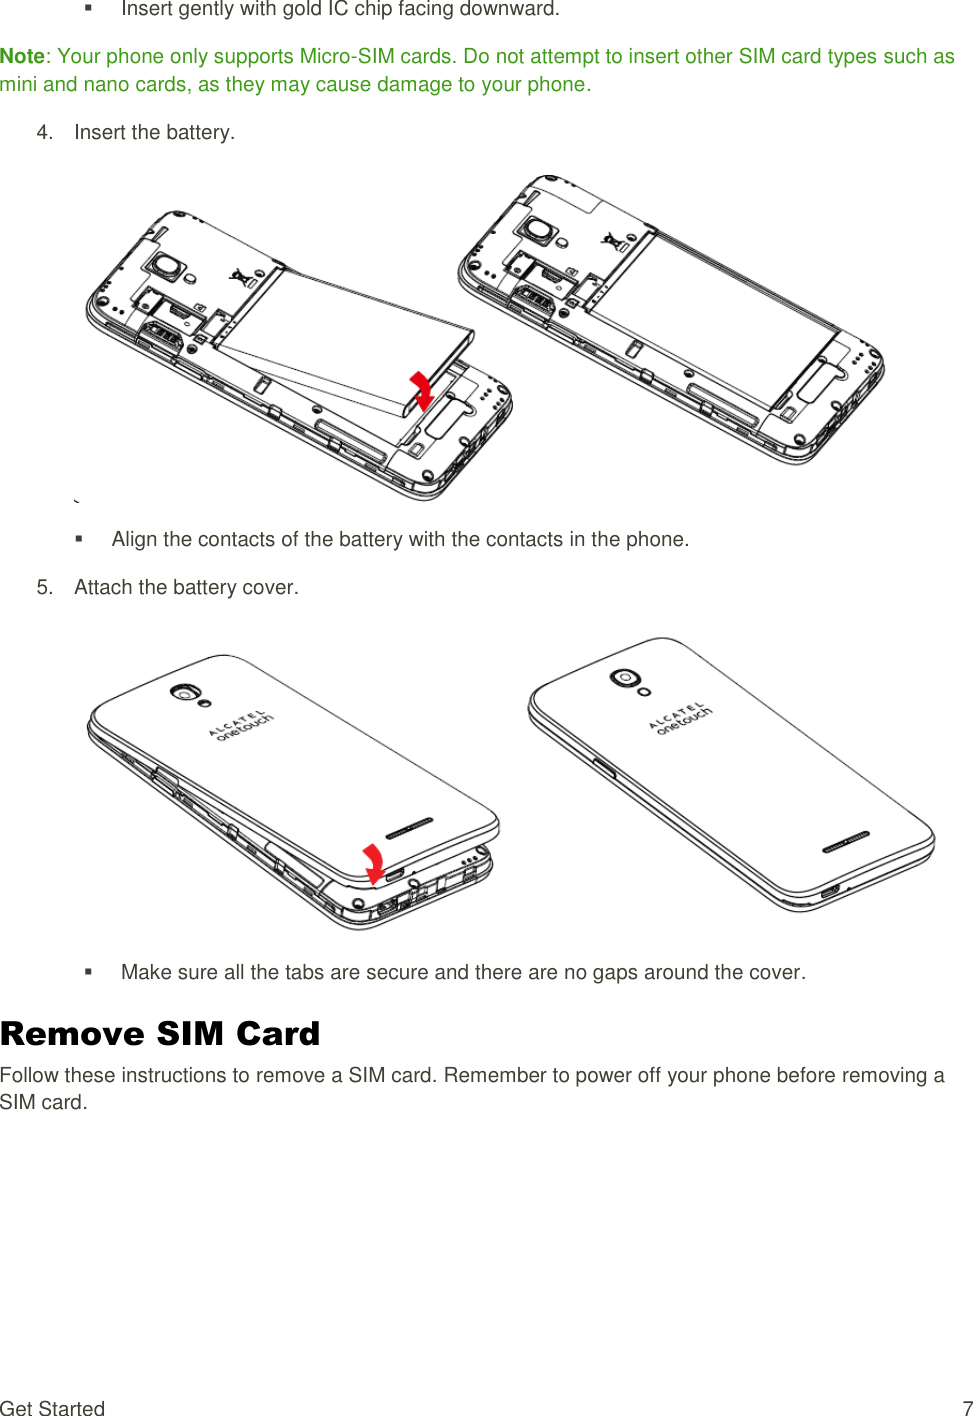 Get Started  7   Insert gently with gold IC chip facing downward. Note: Your phone only supports Micro-SIM cards. Do not attempt to insert other SIM card types such as mini and nano cards, as they may cause damage to your phone. 4.  Insert the battery.     Align the contacts of the battery with the contacts in the phone. 5.  Attach the battery cover.     Make sure all the tabs are secure and there are no gaps around the cover. Remove SIM Card Follow these instructions to remove a SIM card. Remember to power off your phone before removing a SIM card. 